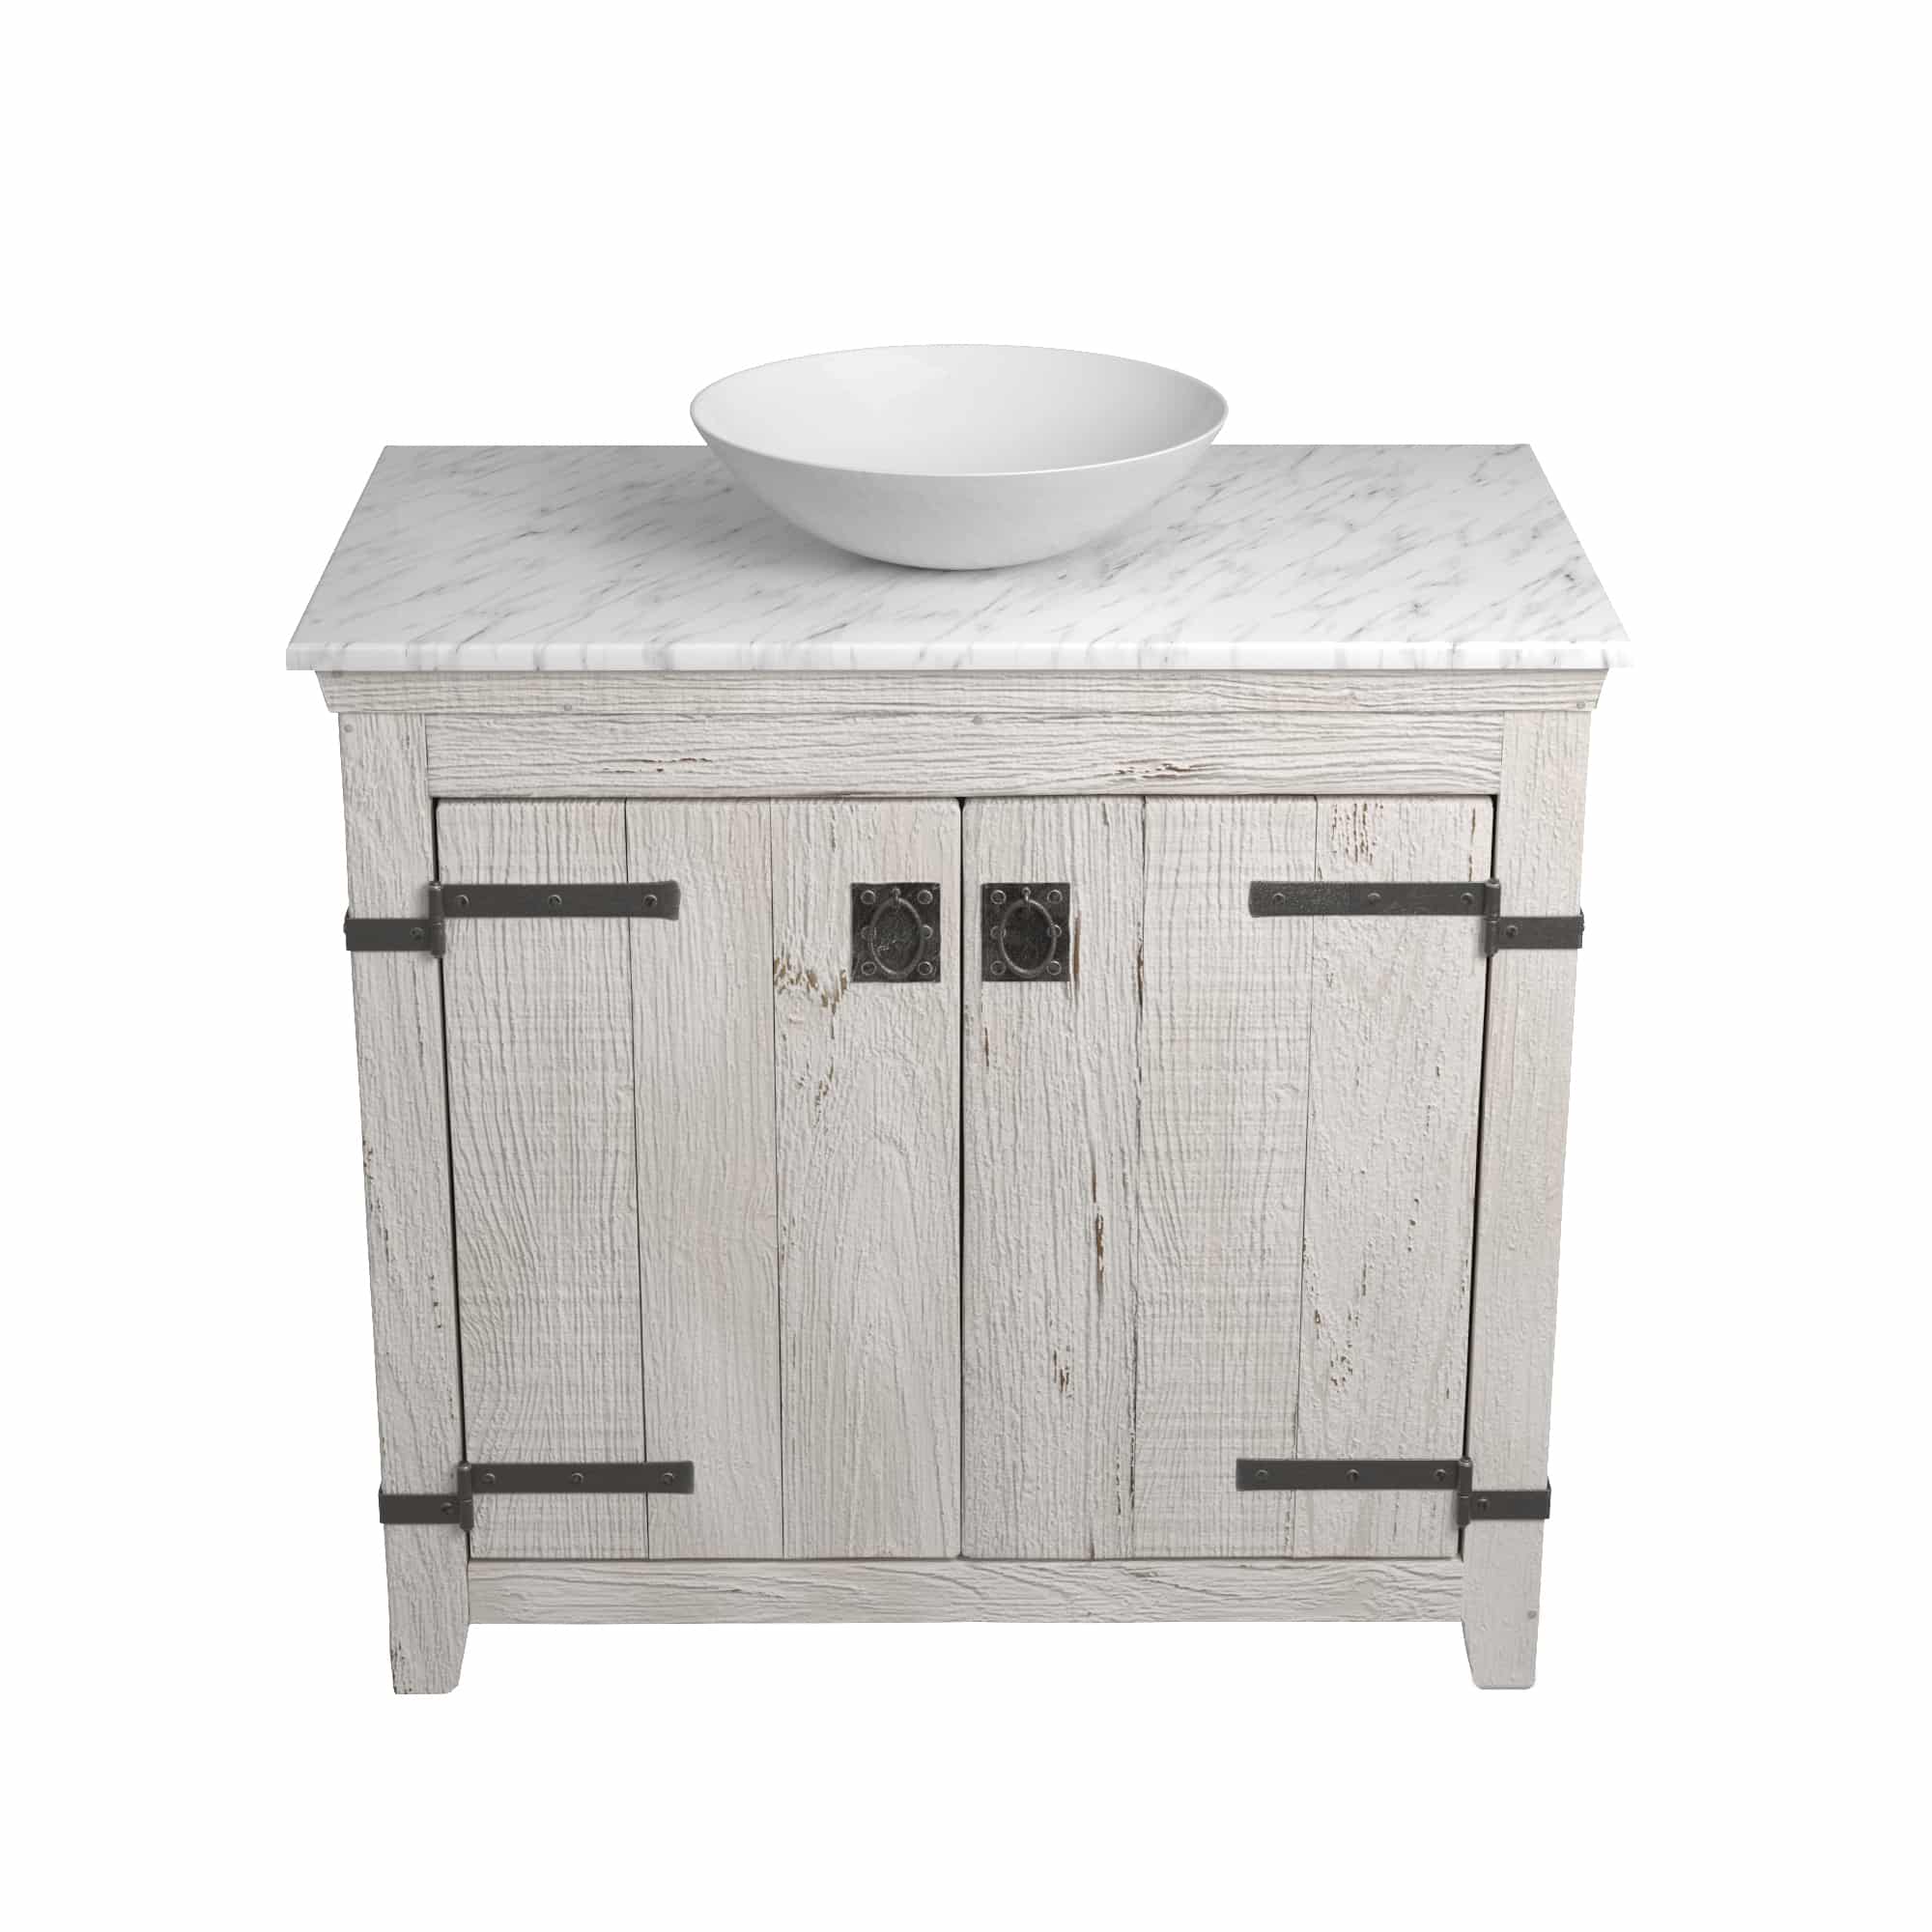 Native Trails 36" Americana Vanity in Whitewash with Carrara Marble Top and Verona in Bianco, Single Faucet Hole, BND36-VB-CT-MG-073